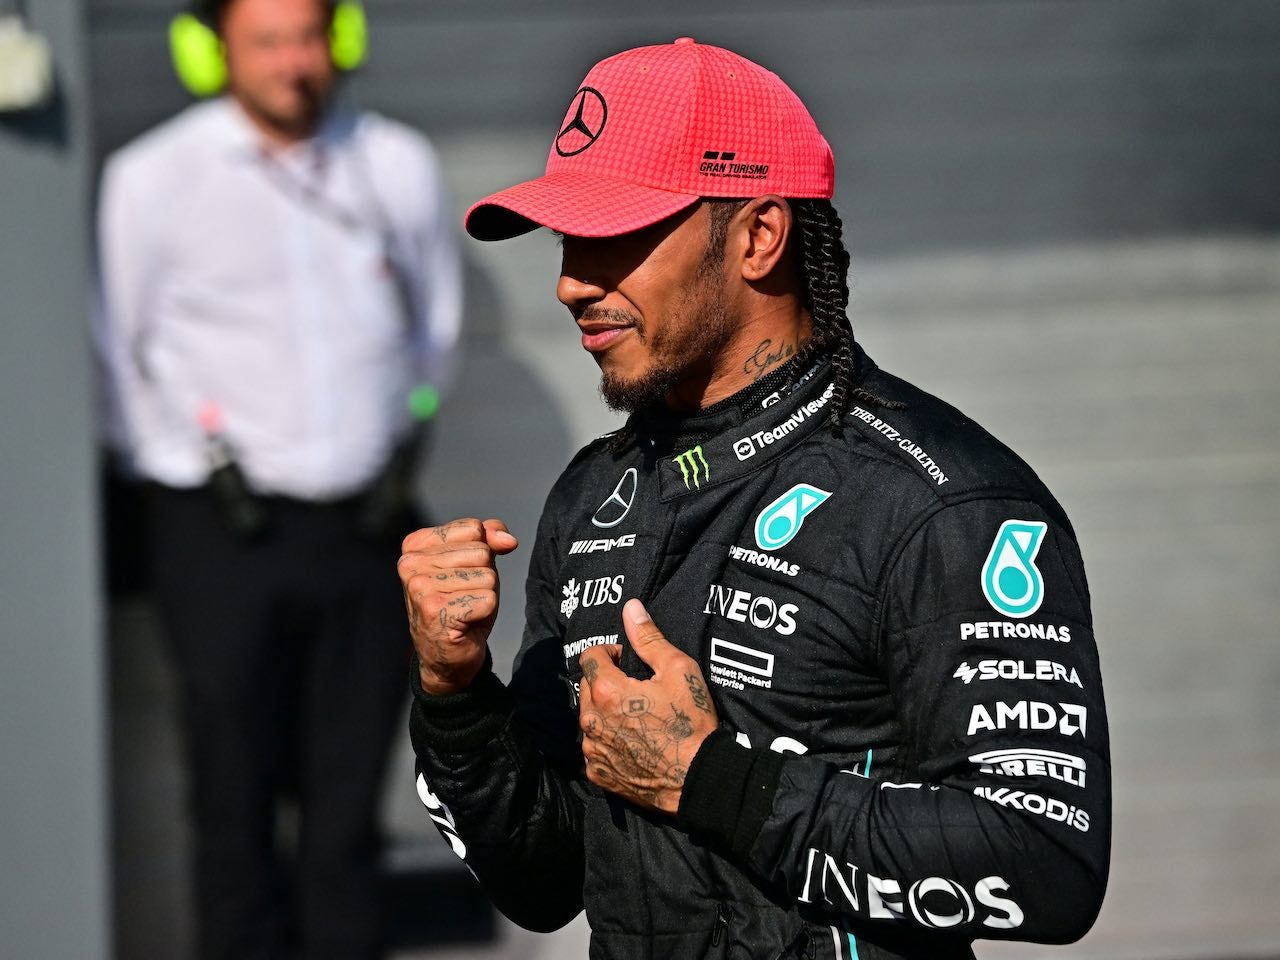 Hamilton poised to sign two-year Mercedes contract